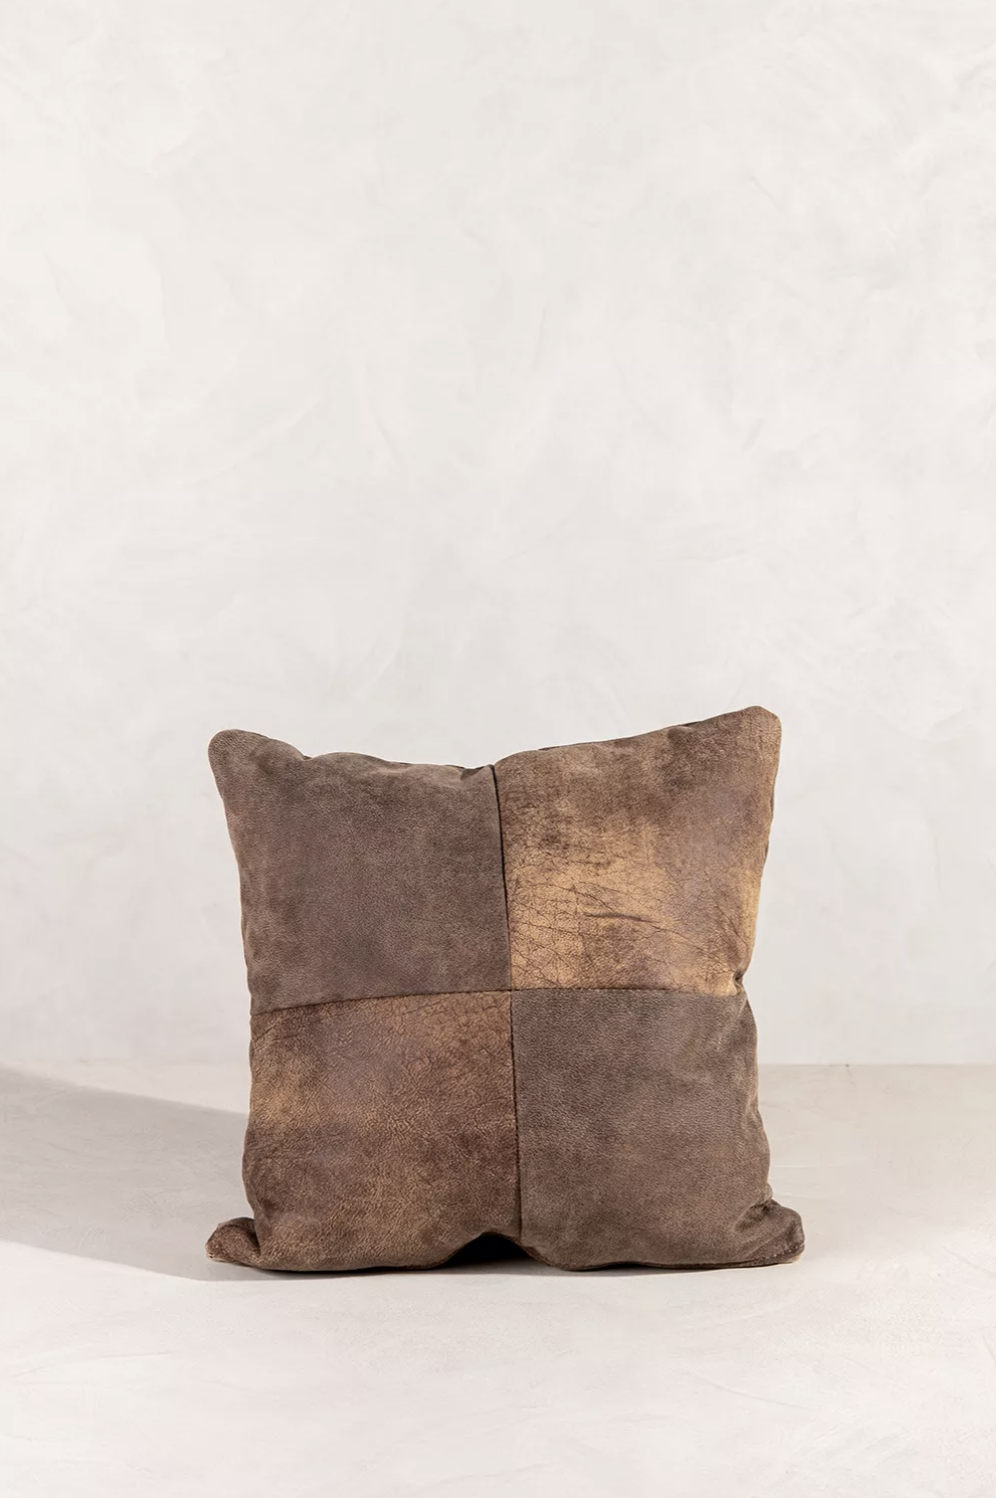 RUBBED LEATHER PILLOW – S